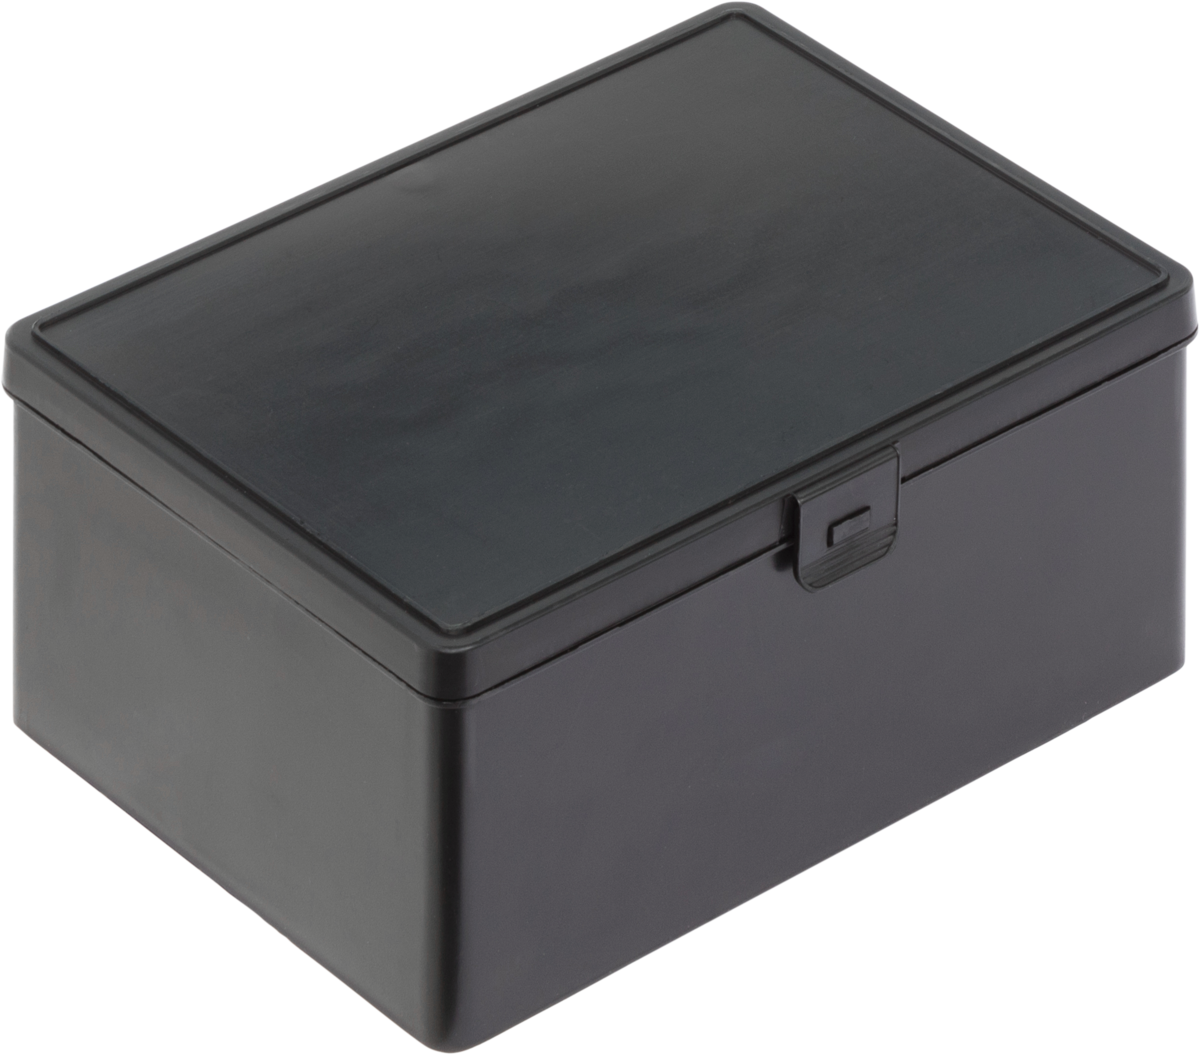 Anti-Static-ESD-Antistatic-One-piece-Lid-small-box-with-snap-lock-and-film-hinge.-Ref-1814.080.992_1004172_180x140x80_01